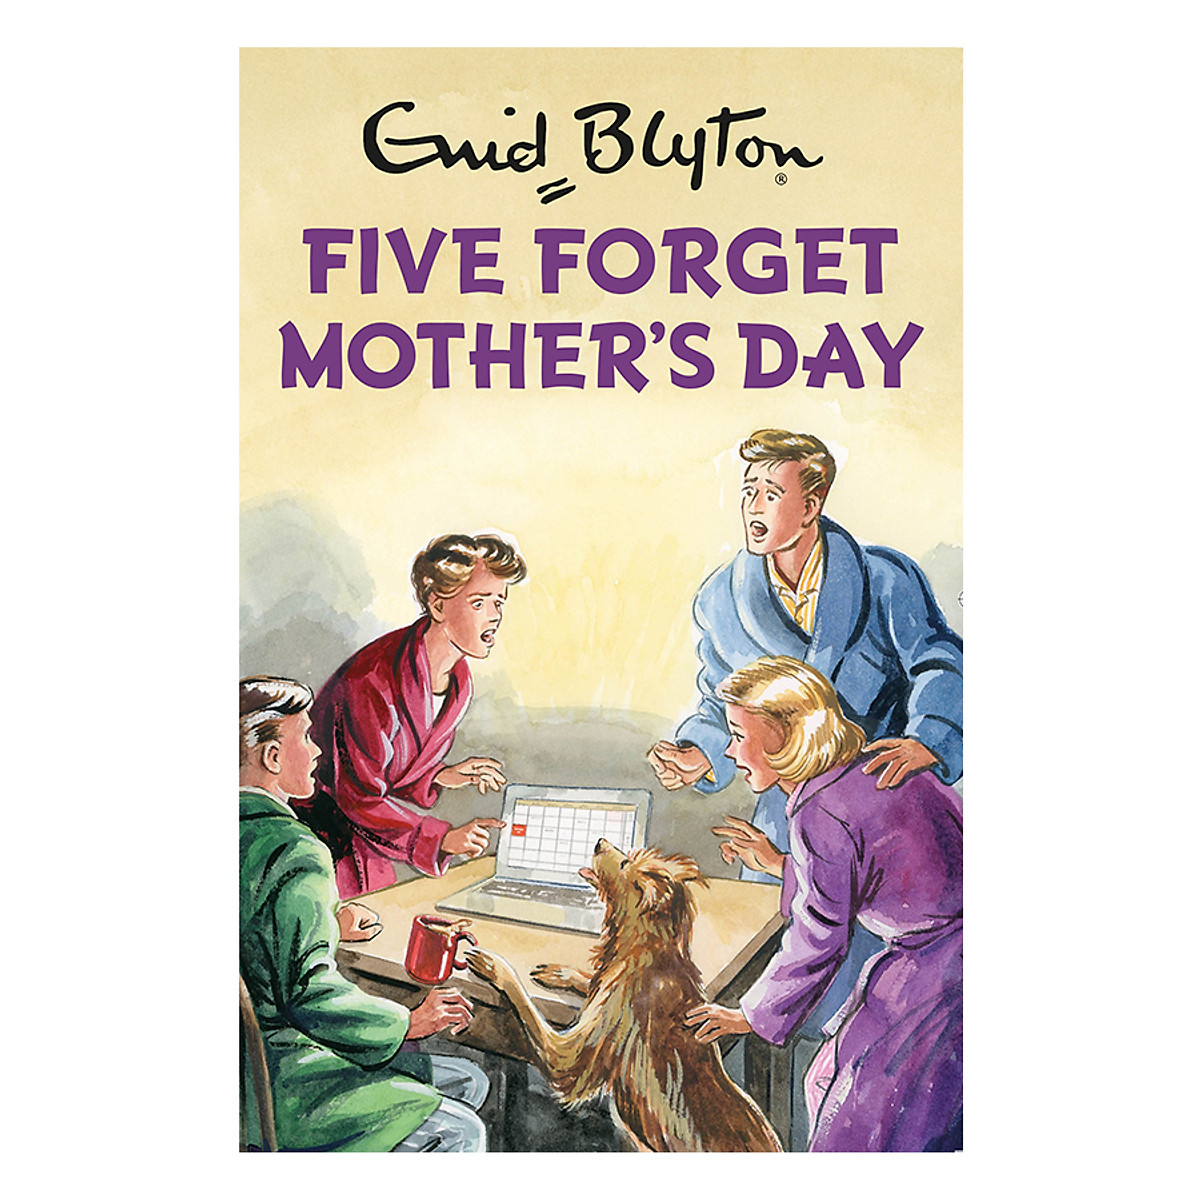 Five Forget Mother's Day